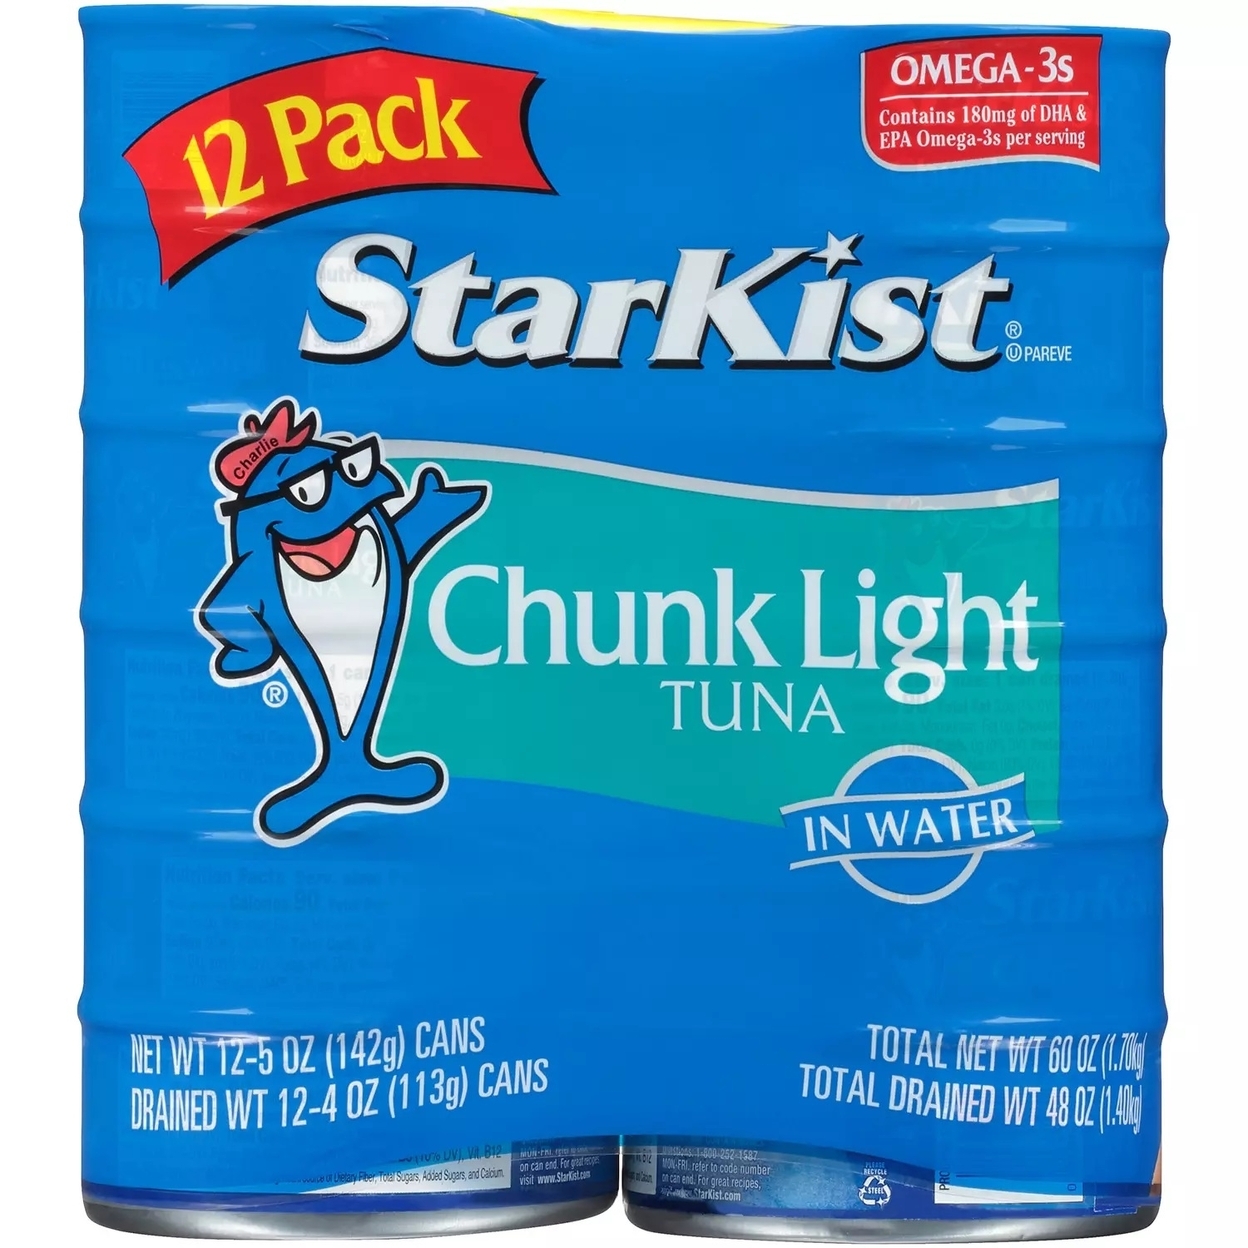 Starkist Chunk Light Tuna in Water 5 Ounce Can (Pack of 12) - image 1 of 5